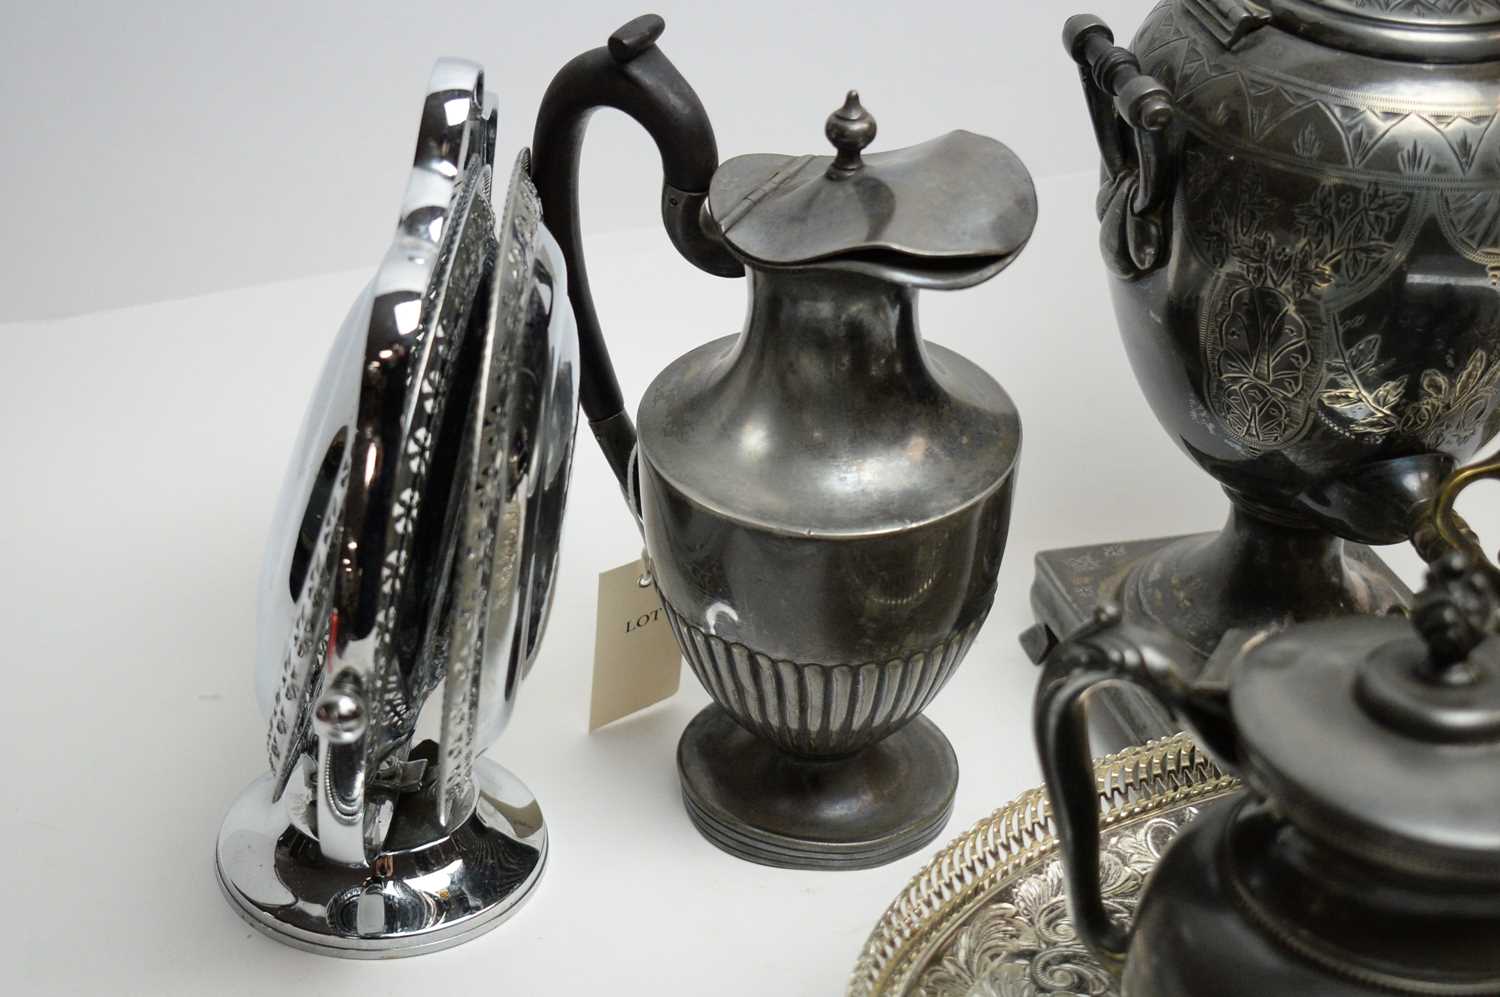 Antique silver-plated items including a Victorian tea urn. - Image 4 of 6